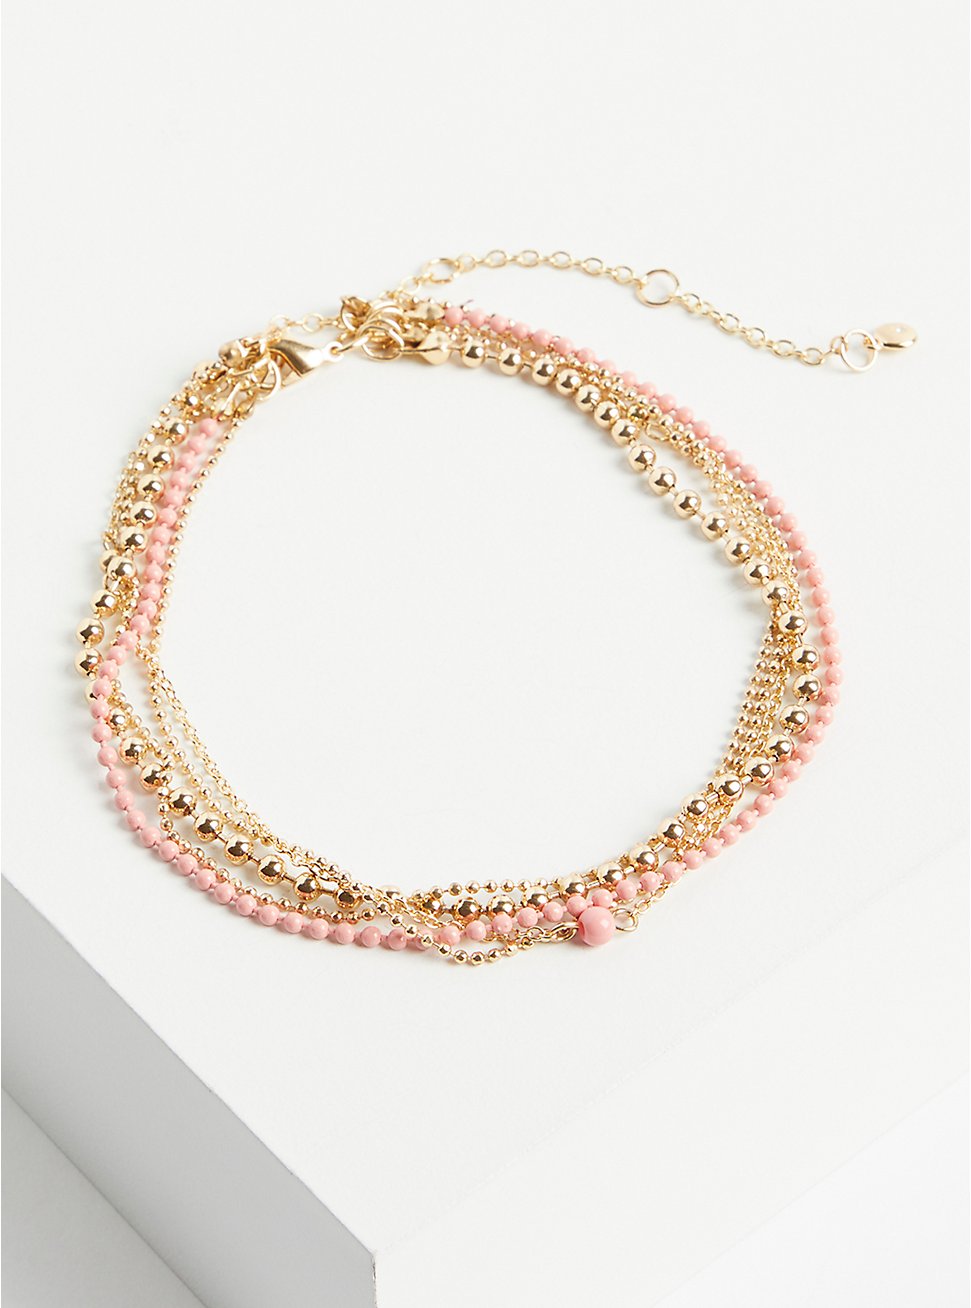 Plus Size Beaded Anklet - Gold Tone with Matte Coral, , hi-res